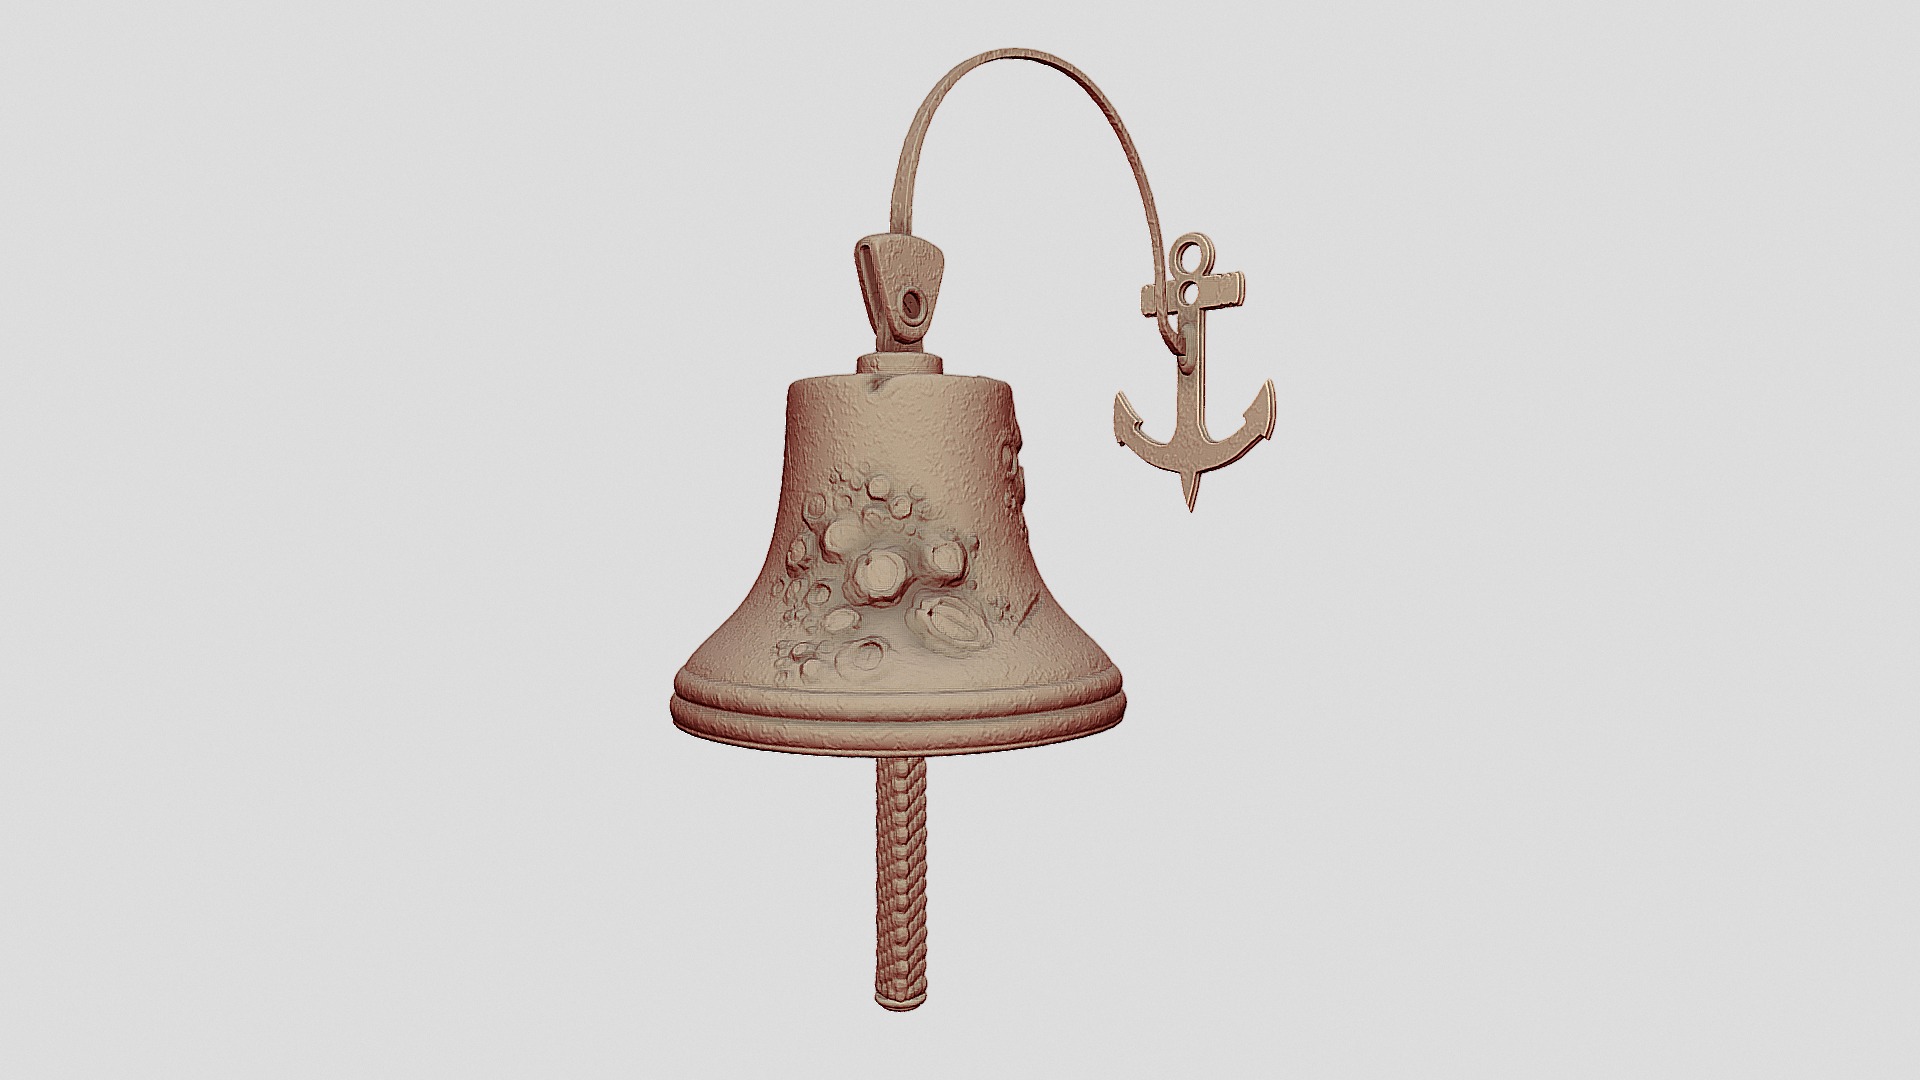 3D model Nautical Ship Bell – Rusted Barnacle Version - This is a 3D model of the Nautical Ship Bell - Rusted Barnacle Version. The 3D model is about a brown and gold purse.